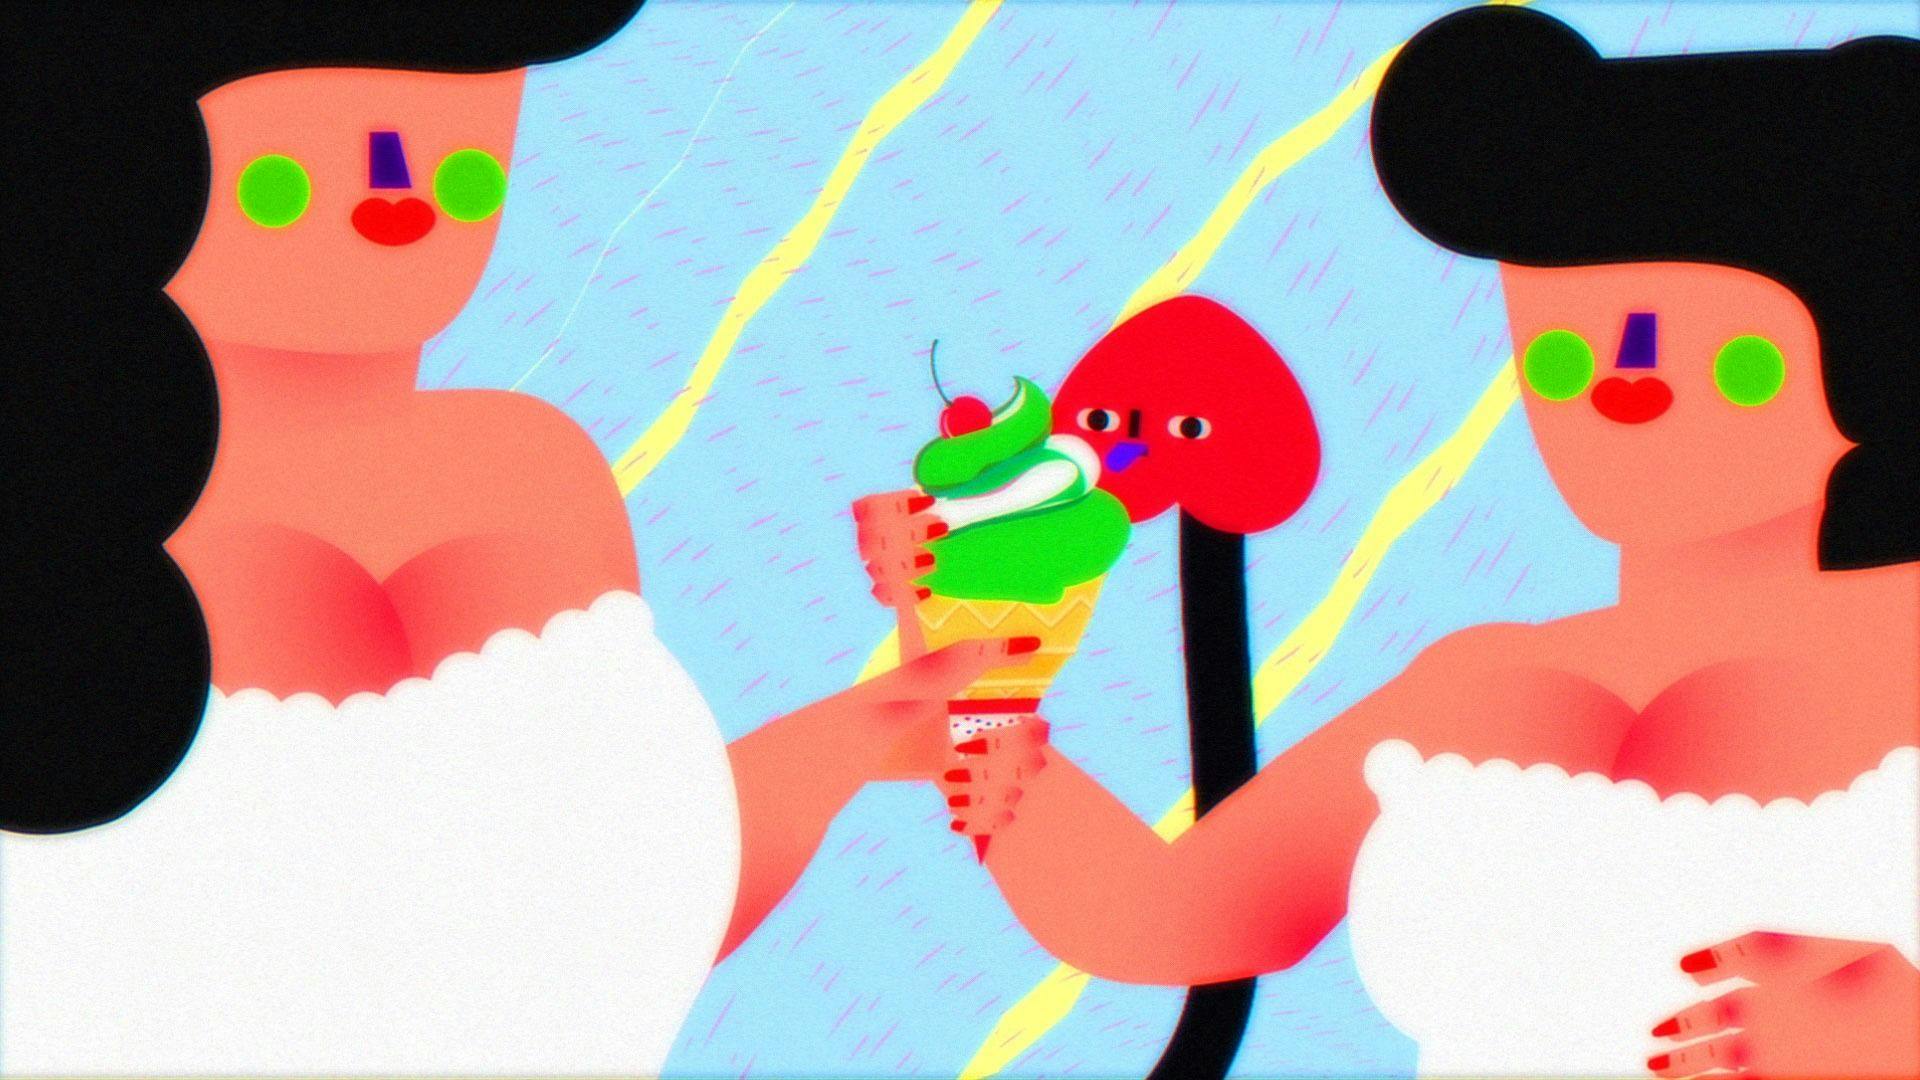 Computer-generated, cartoon-like image of two people sharing a green ice cream with a cherry on top of it. The two people look the same and are wearing white dresses.